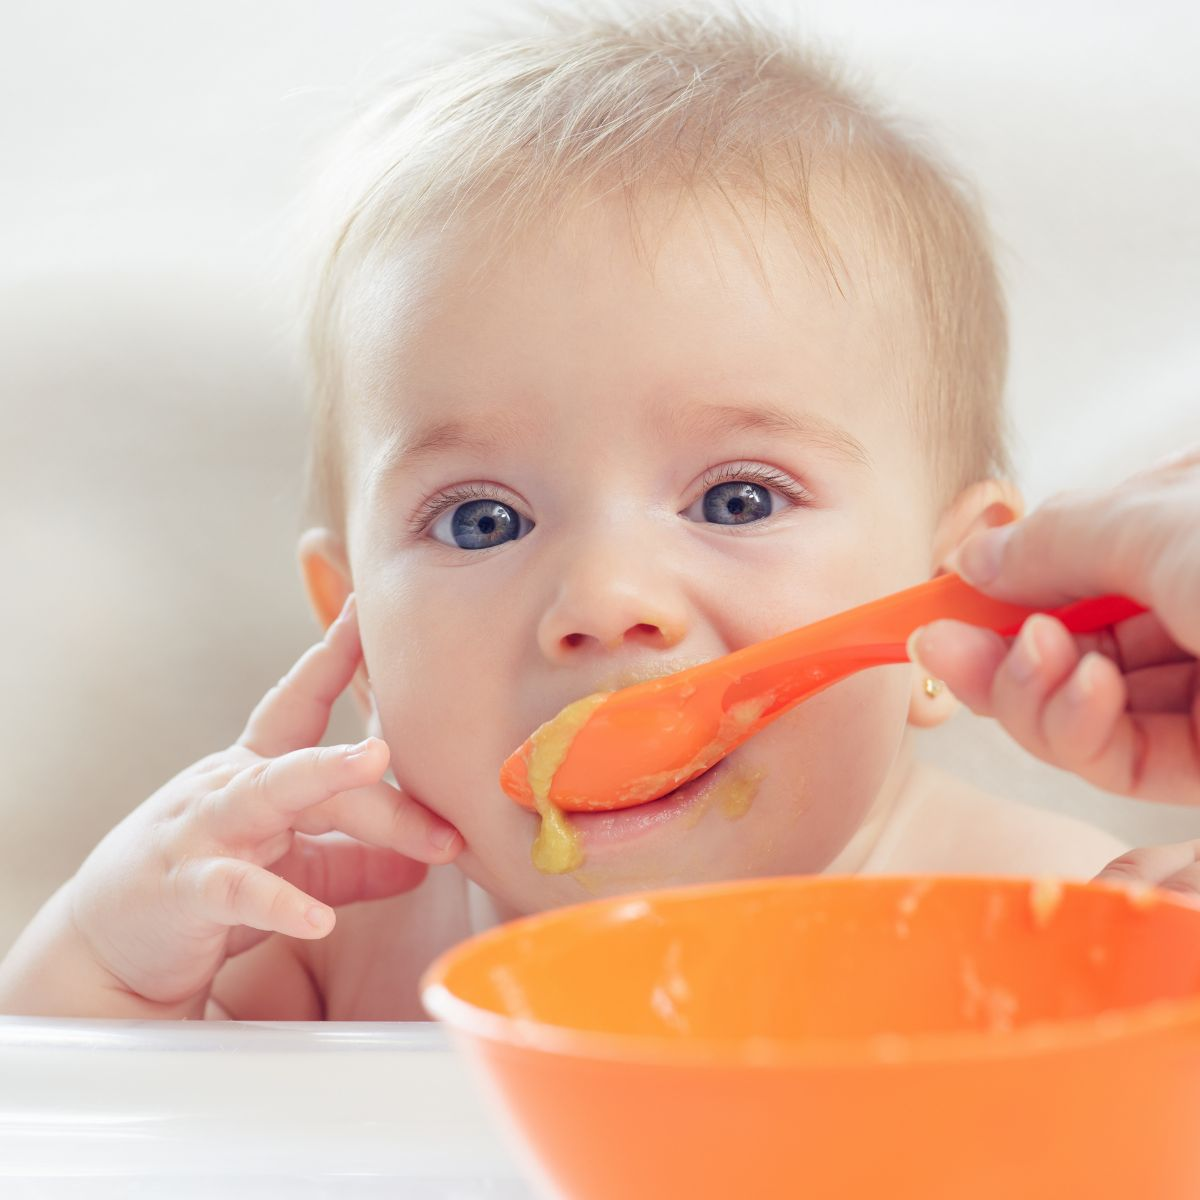 Baby eating out of orange spoon